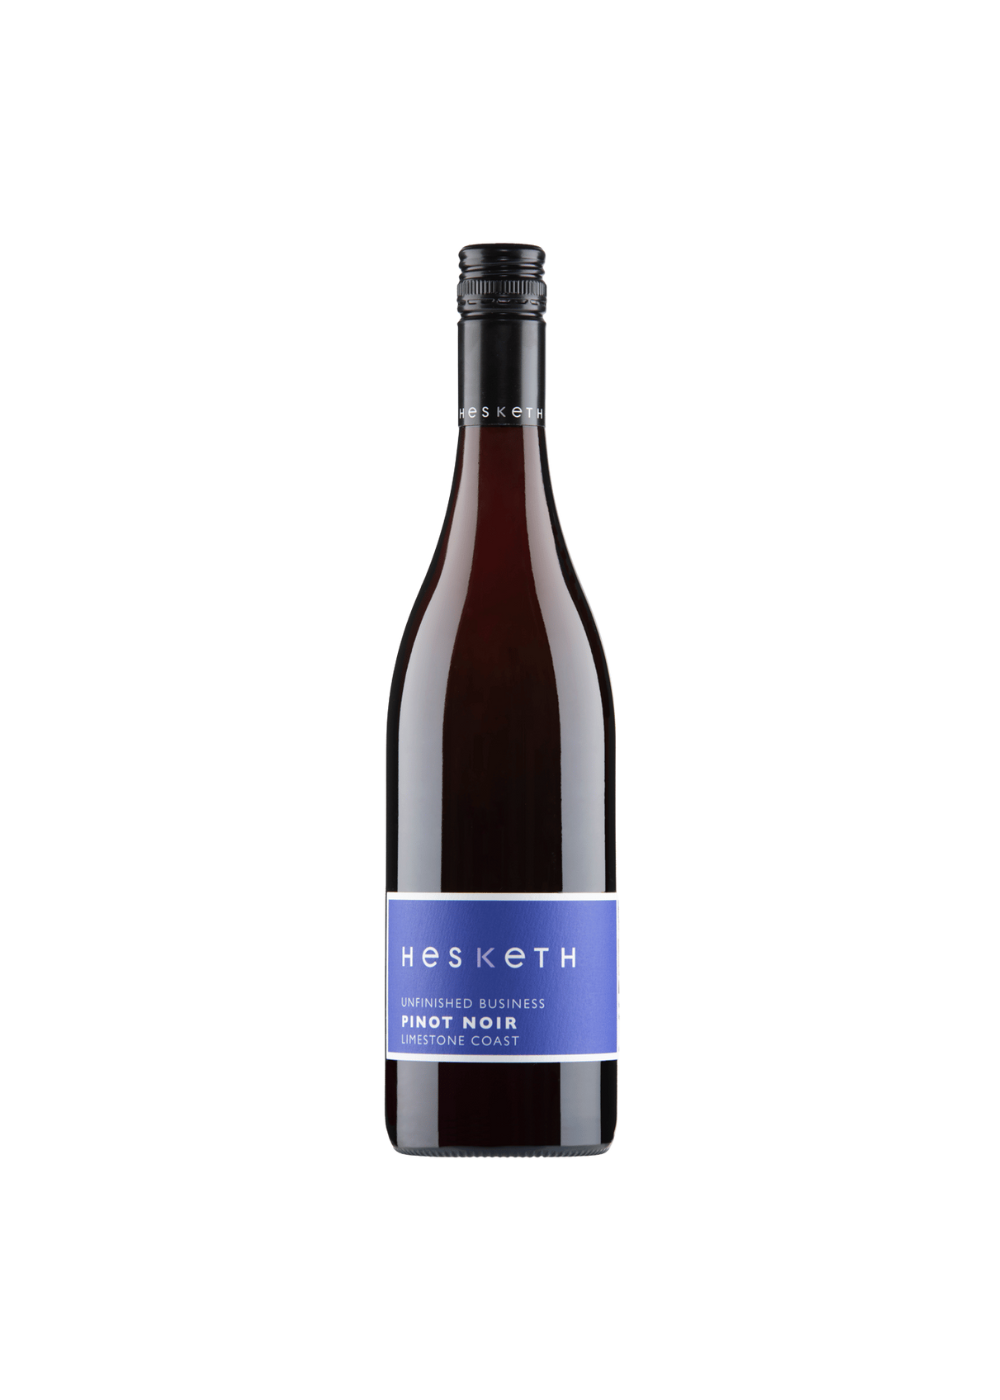 Hesketh, Unfinished Business Pinot Noir